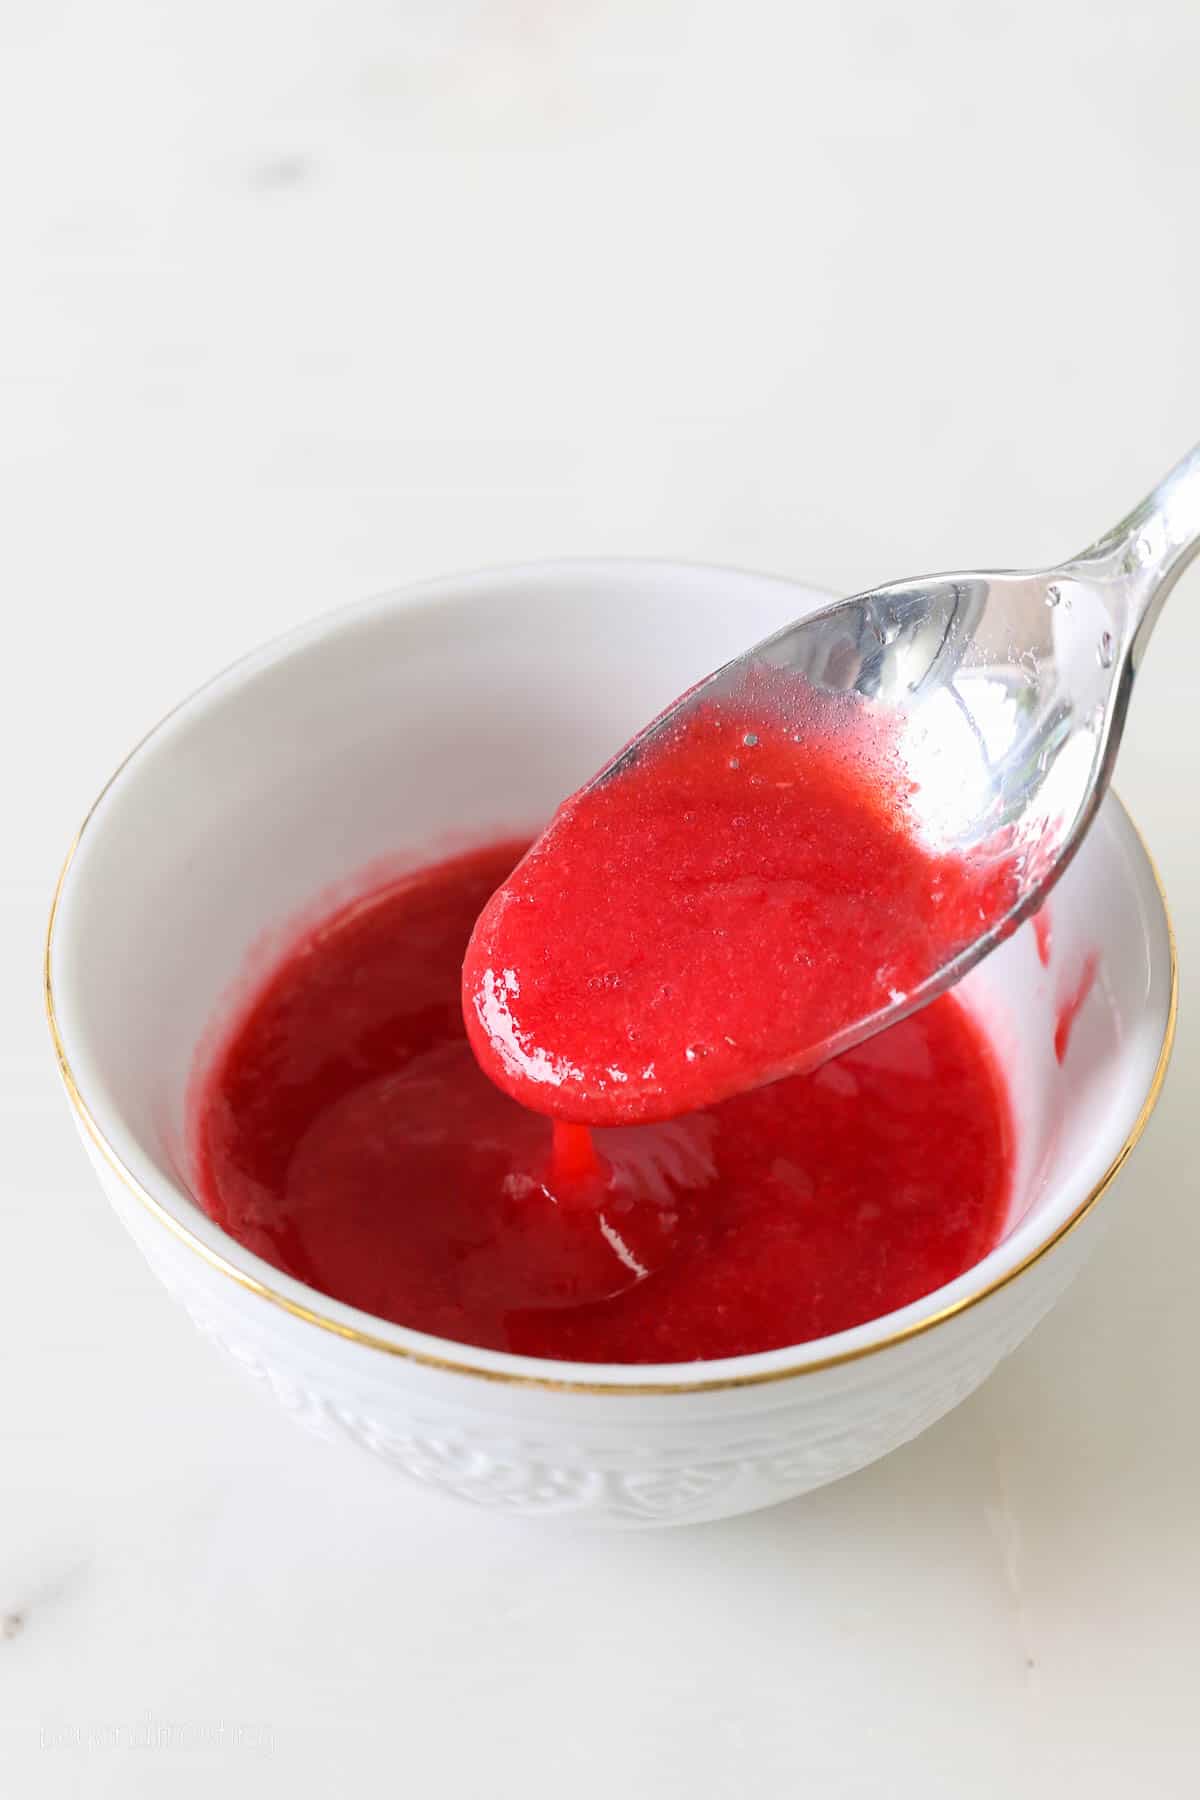 Raspberry puree dripping off a spoon into a white bowl